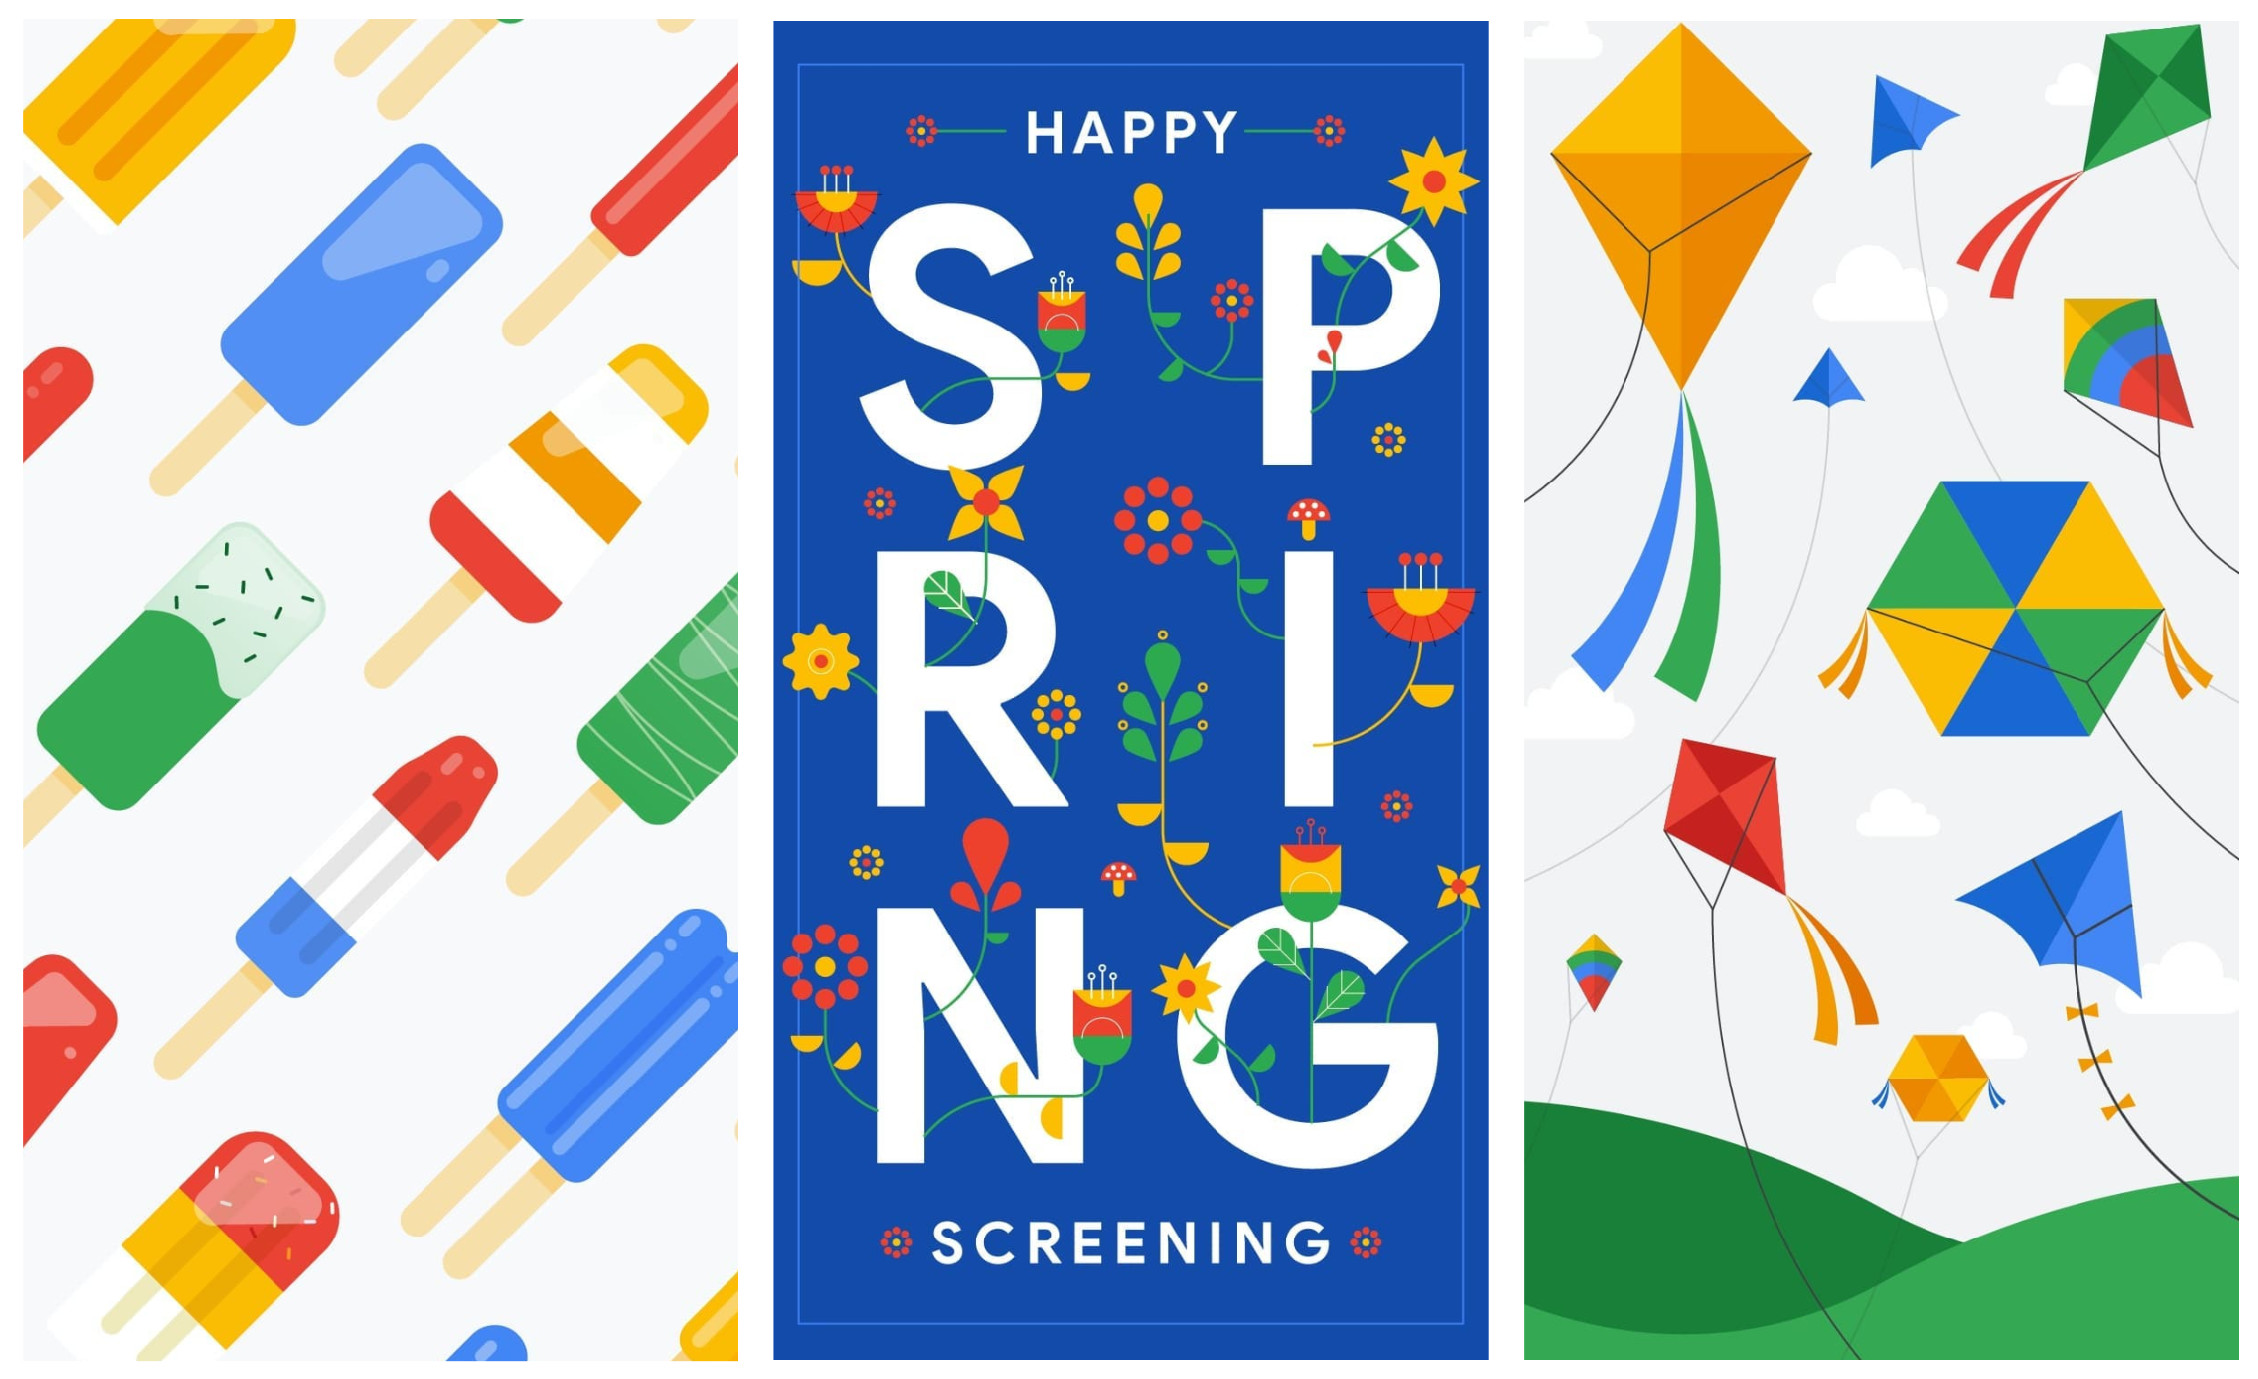 2258x1379 ... feels like winter is finally relenting, and Google seems to be getting  into the vernal spirit: the company shared a number of spring-themed  wallpapers ...